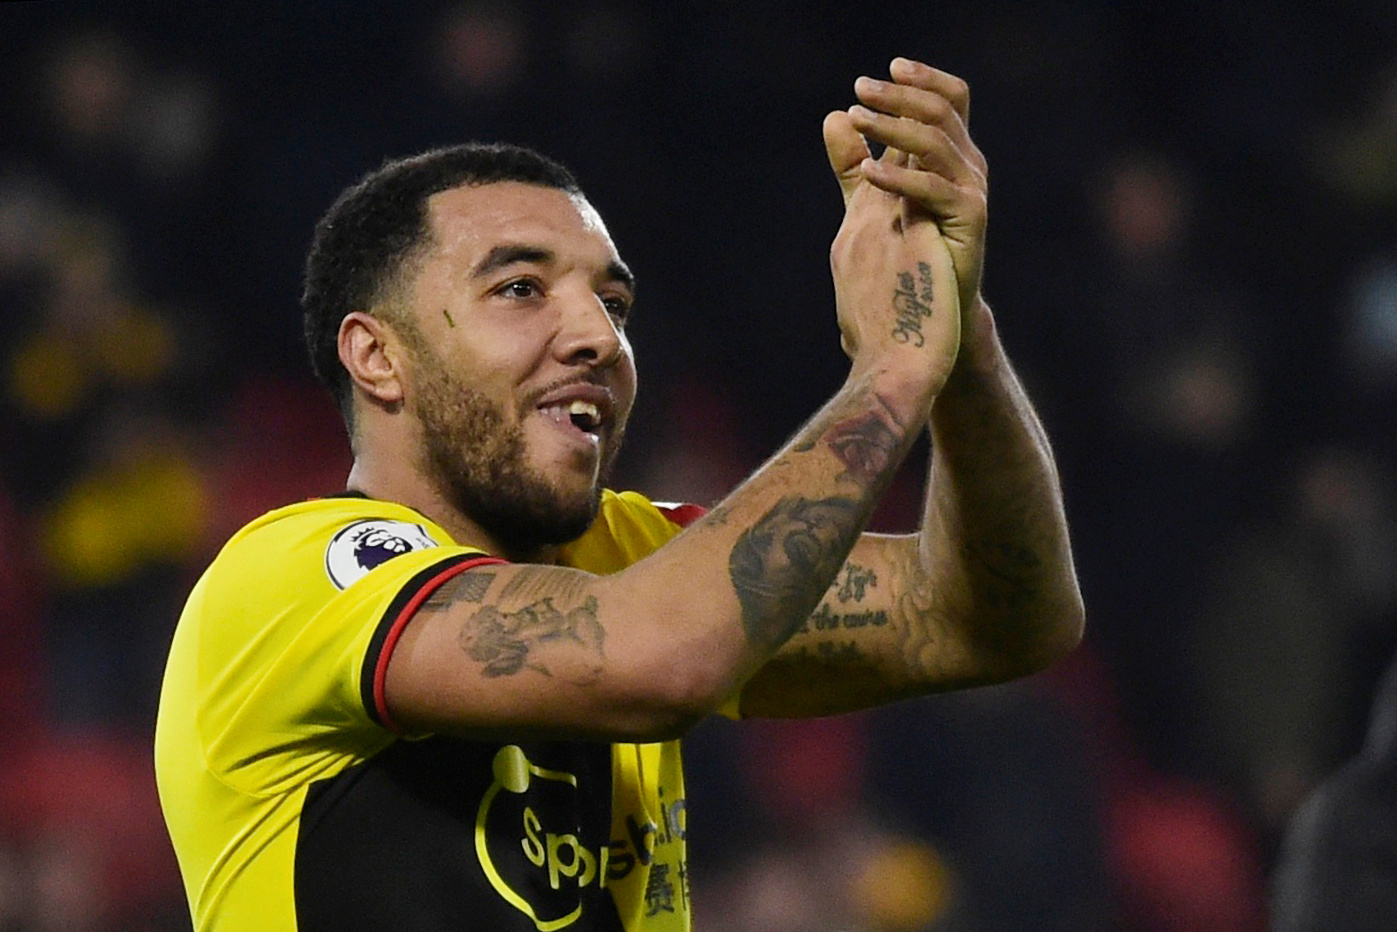 Today marks ten years at Watford for captain Troy Deeney